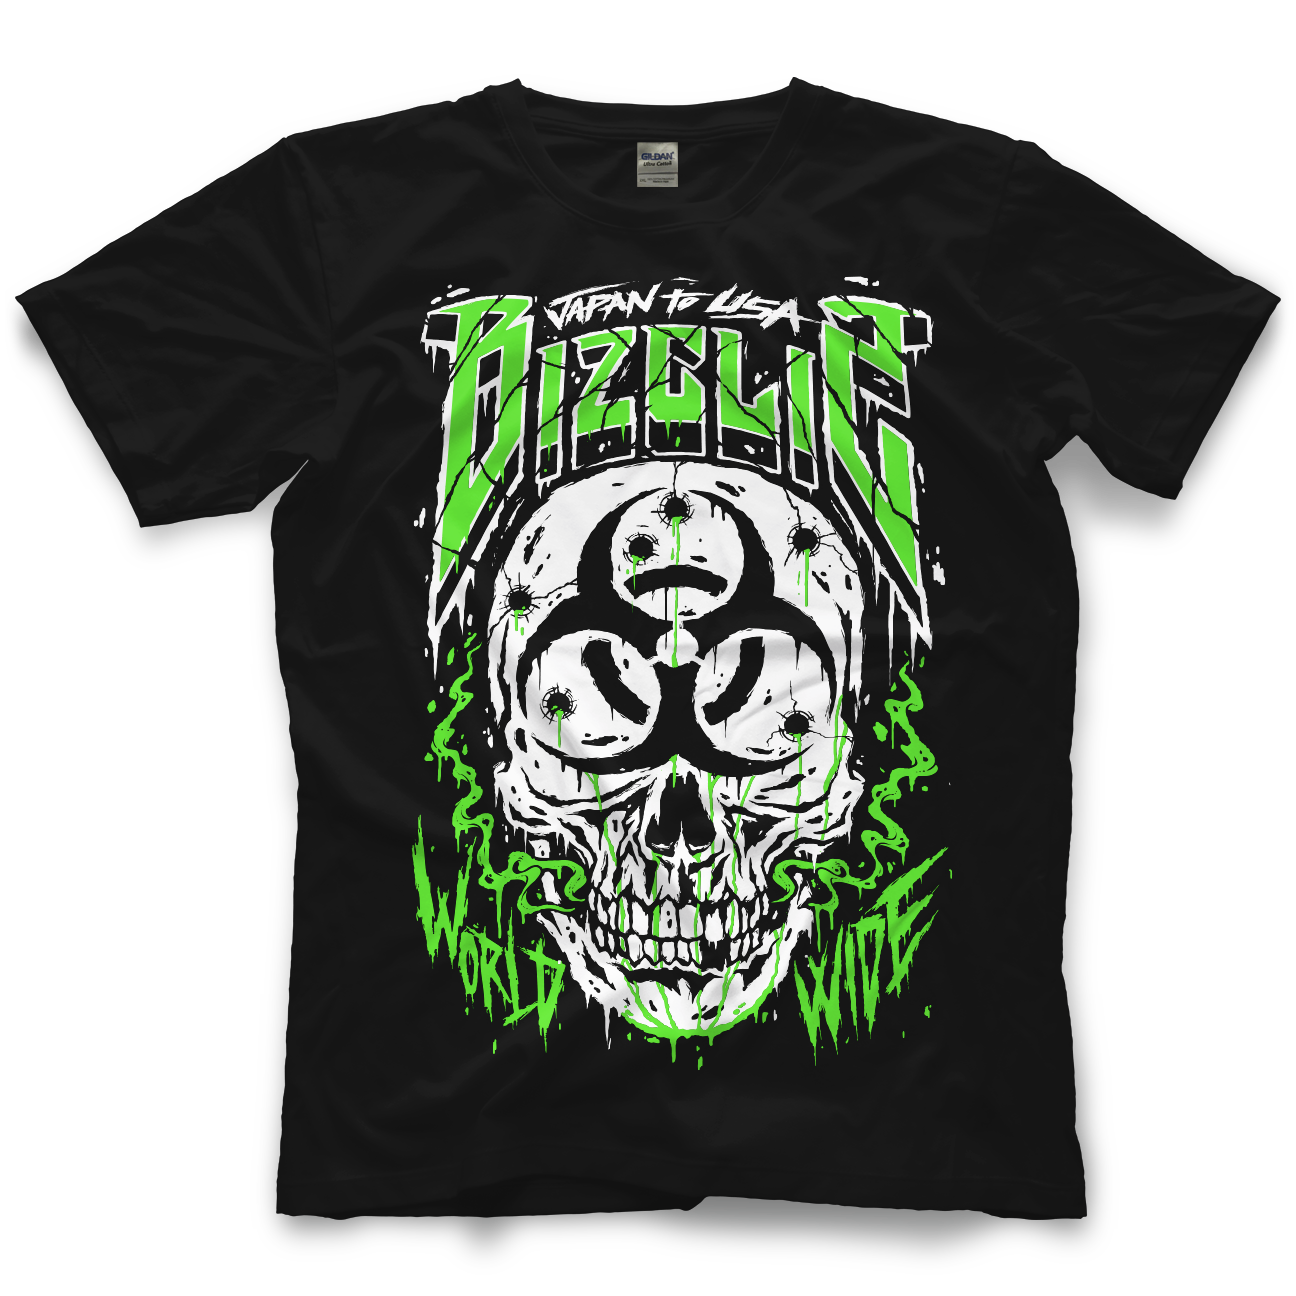 CODY RHODES NEW JAPAN T-SHIRT RELEASED AND MORE AT PROWRESTLINGTEES.COM ...